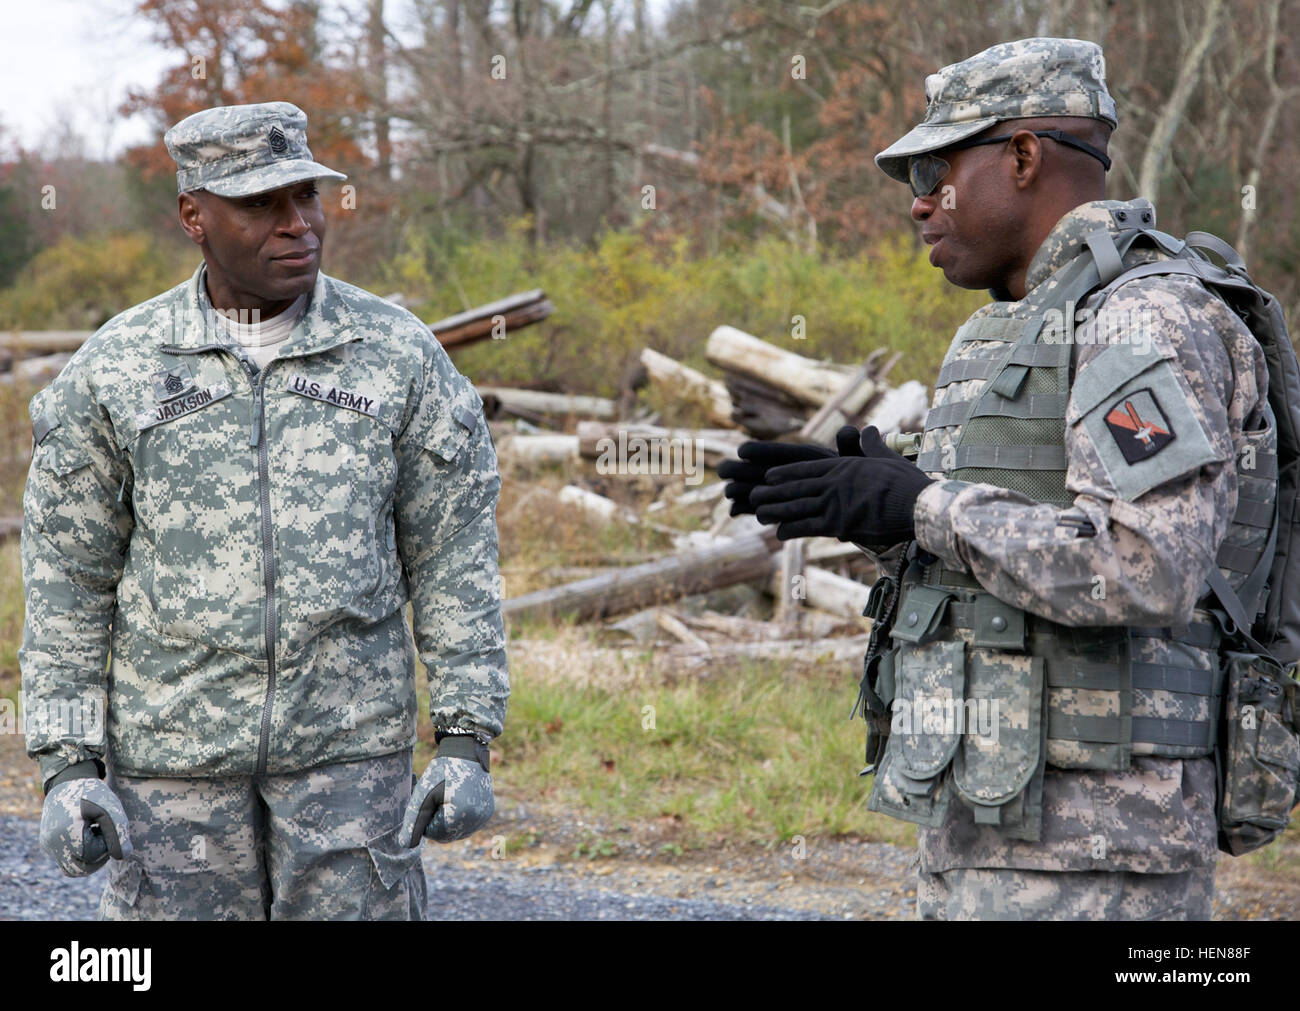 U.S. Army Command Sgt. Maj. James Jackson (left), command sergeant major of 114th Signal Battalion and Sgt. 1st Class Rufus Smith, attached to 55th Signal Company (Combat Camera), talk together during a tactical field training exercise (FTX) at the Ft. Indiantown Gap National Guard Training Center, Annville, Pa., Nov. 5, 2013. The FTX is conducted quarterly to bring soldiers together and practice tactical training from the Army Mission Essential Task List as a battalion. (U.S. Army photo by Sgt. Evangelia Grigiss/Released) 114th Signal Battalion field training exercise 131105-A-LQ527-082 Stock Photo